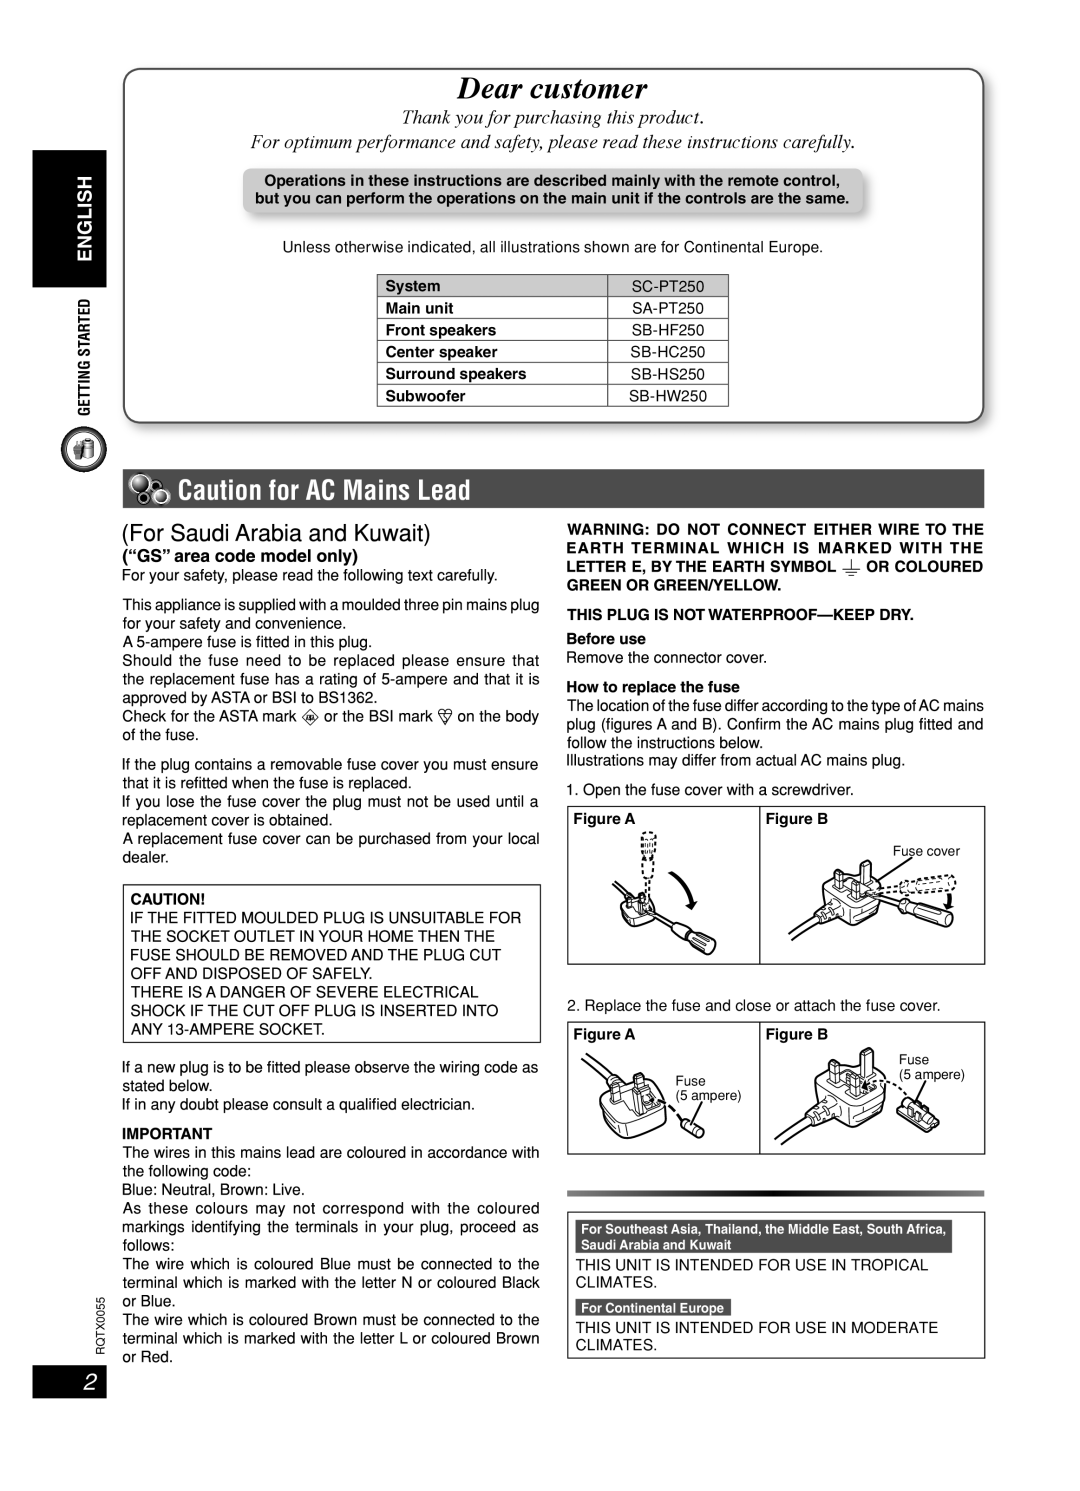 Panasonic SC-PT 250 Caution for AC Mains Lead, Thank you for purchasing this product, Getting Started English, System 